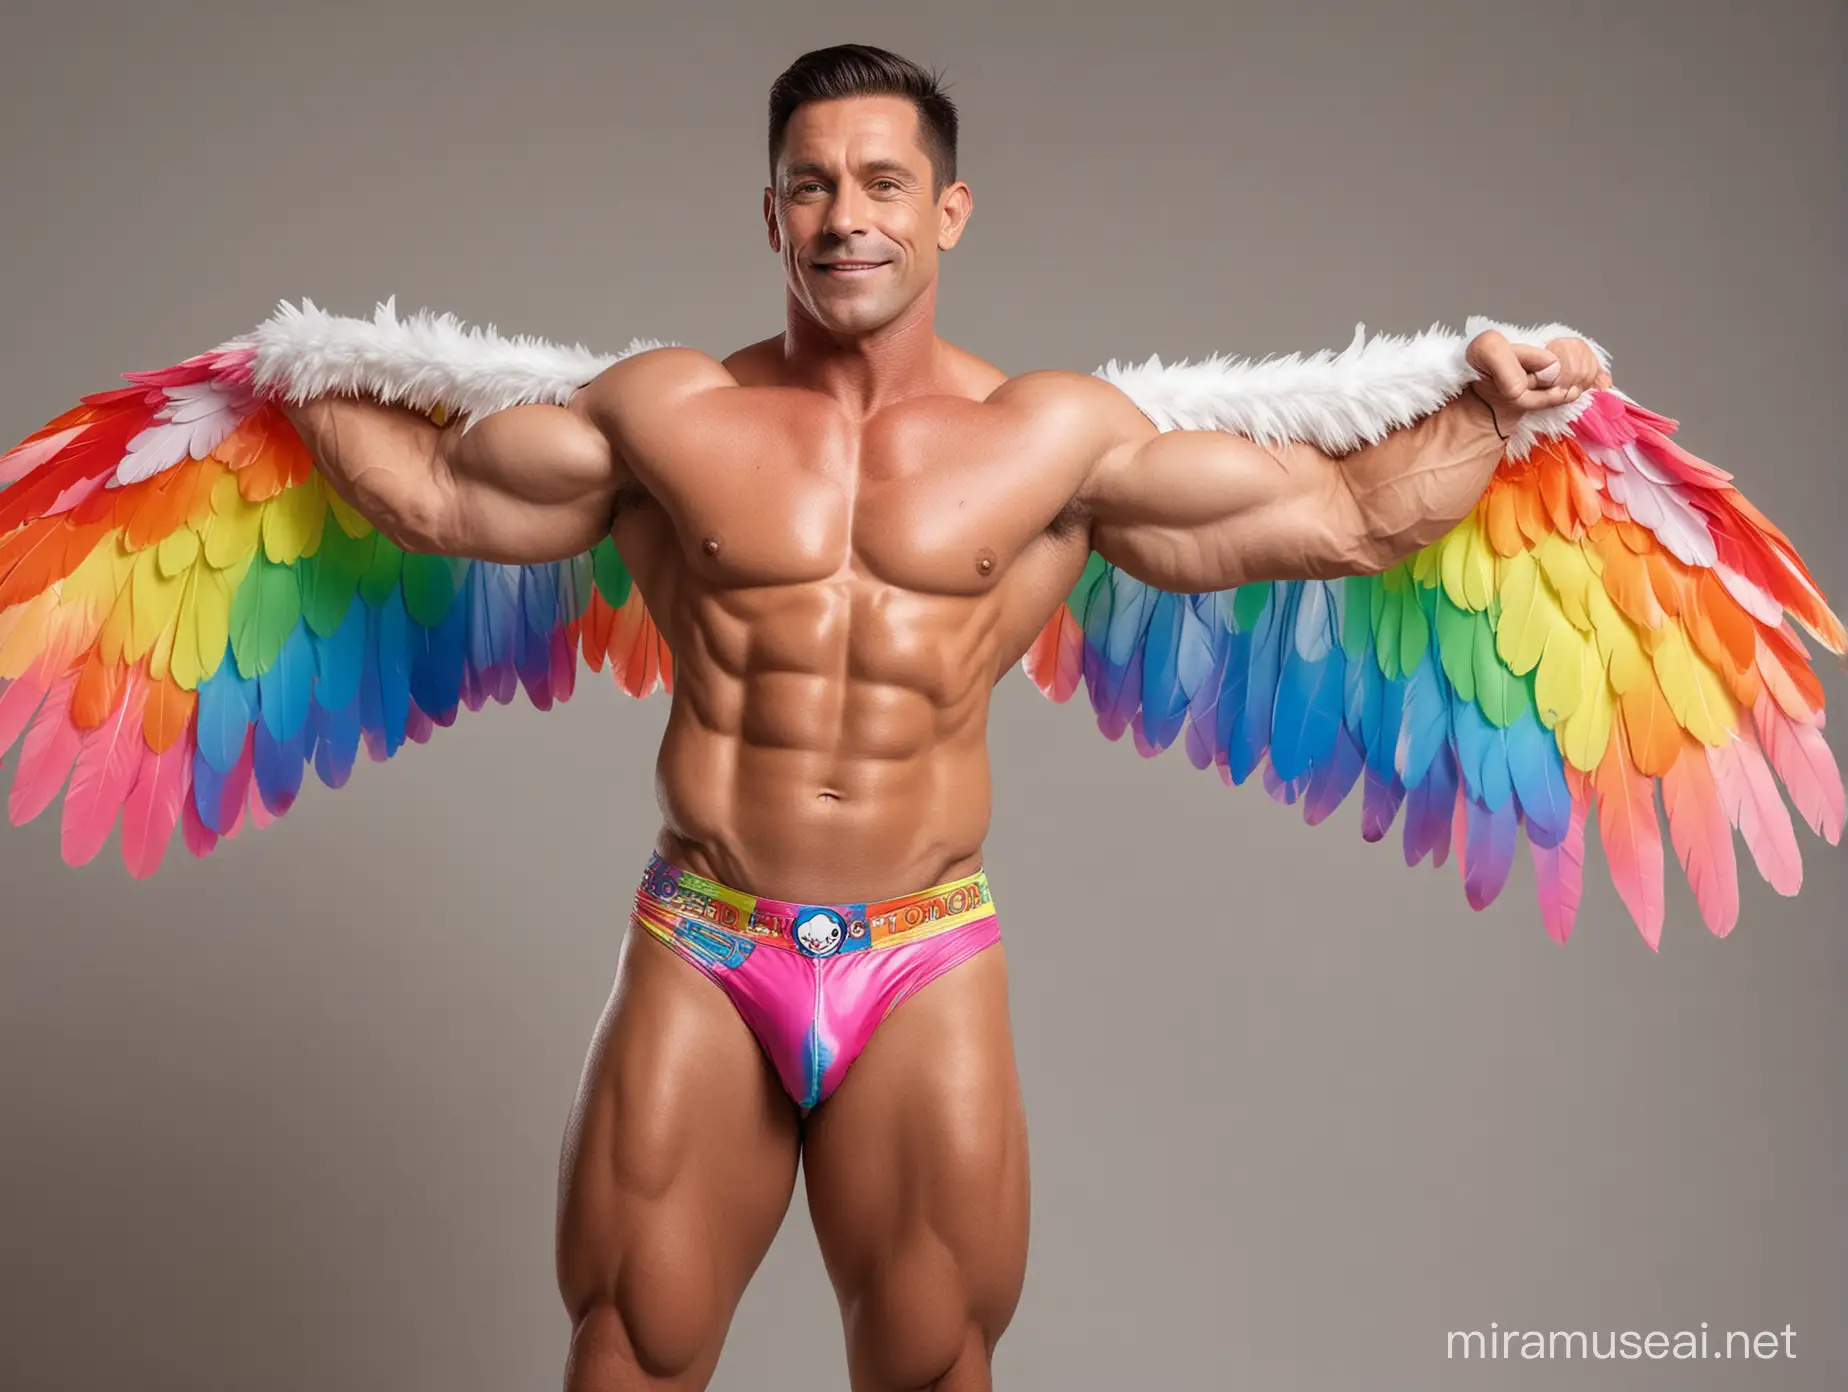 Topless 40s Ultra Beefy IFBB Bodybuilder Male Wearing Multi-Highlighter Bright Rainbow Coloured See Through Eagle Wings Jacket short shorts and Flexing Big Strong Arm with Doraemon